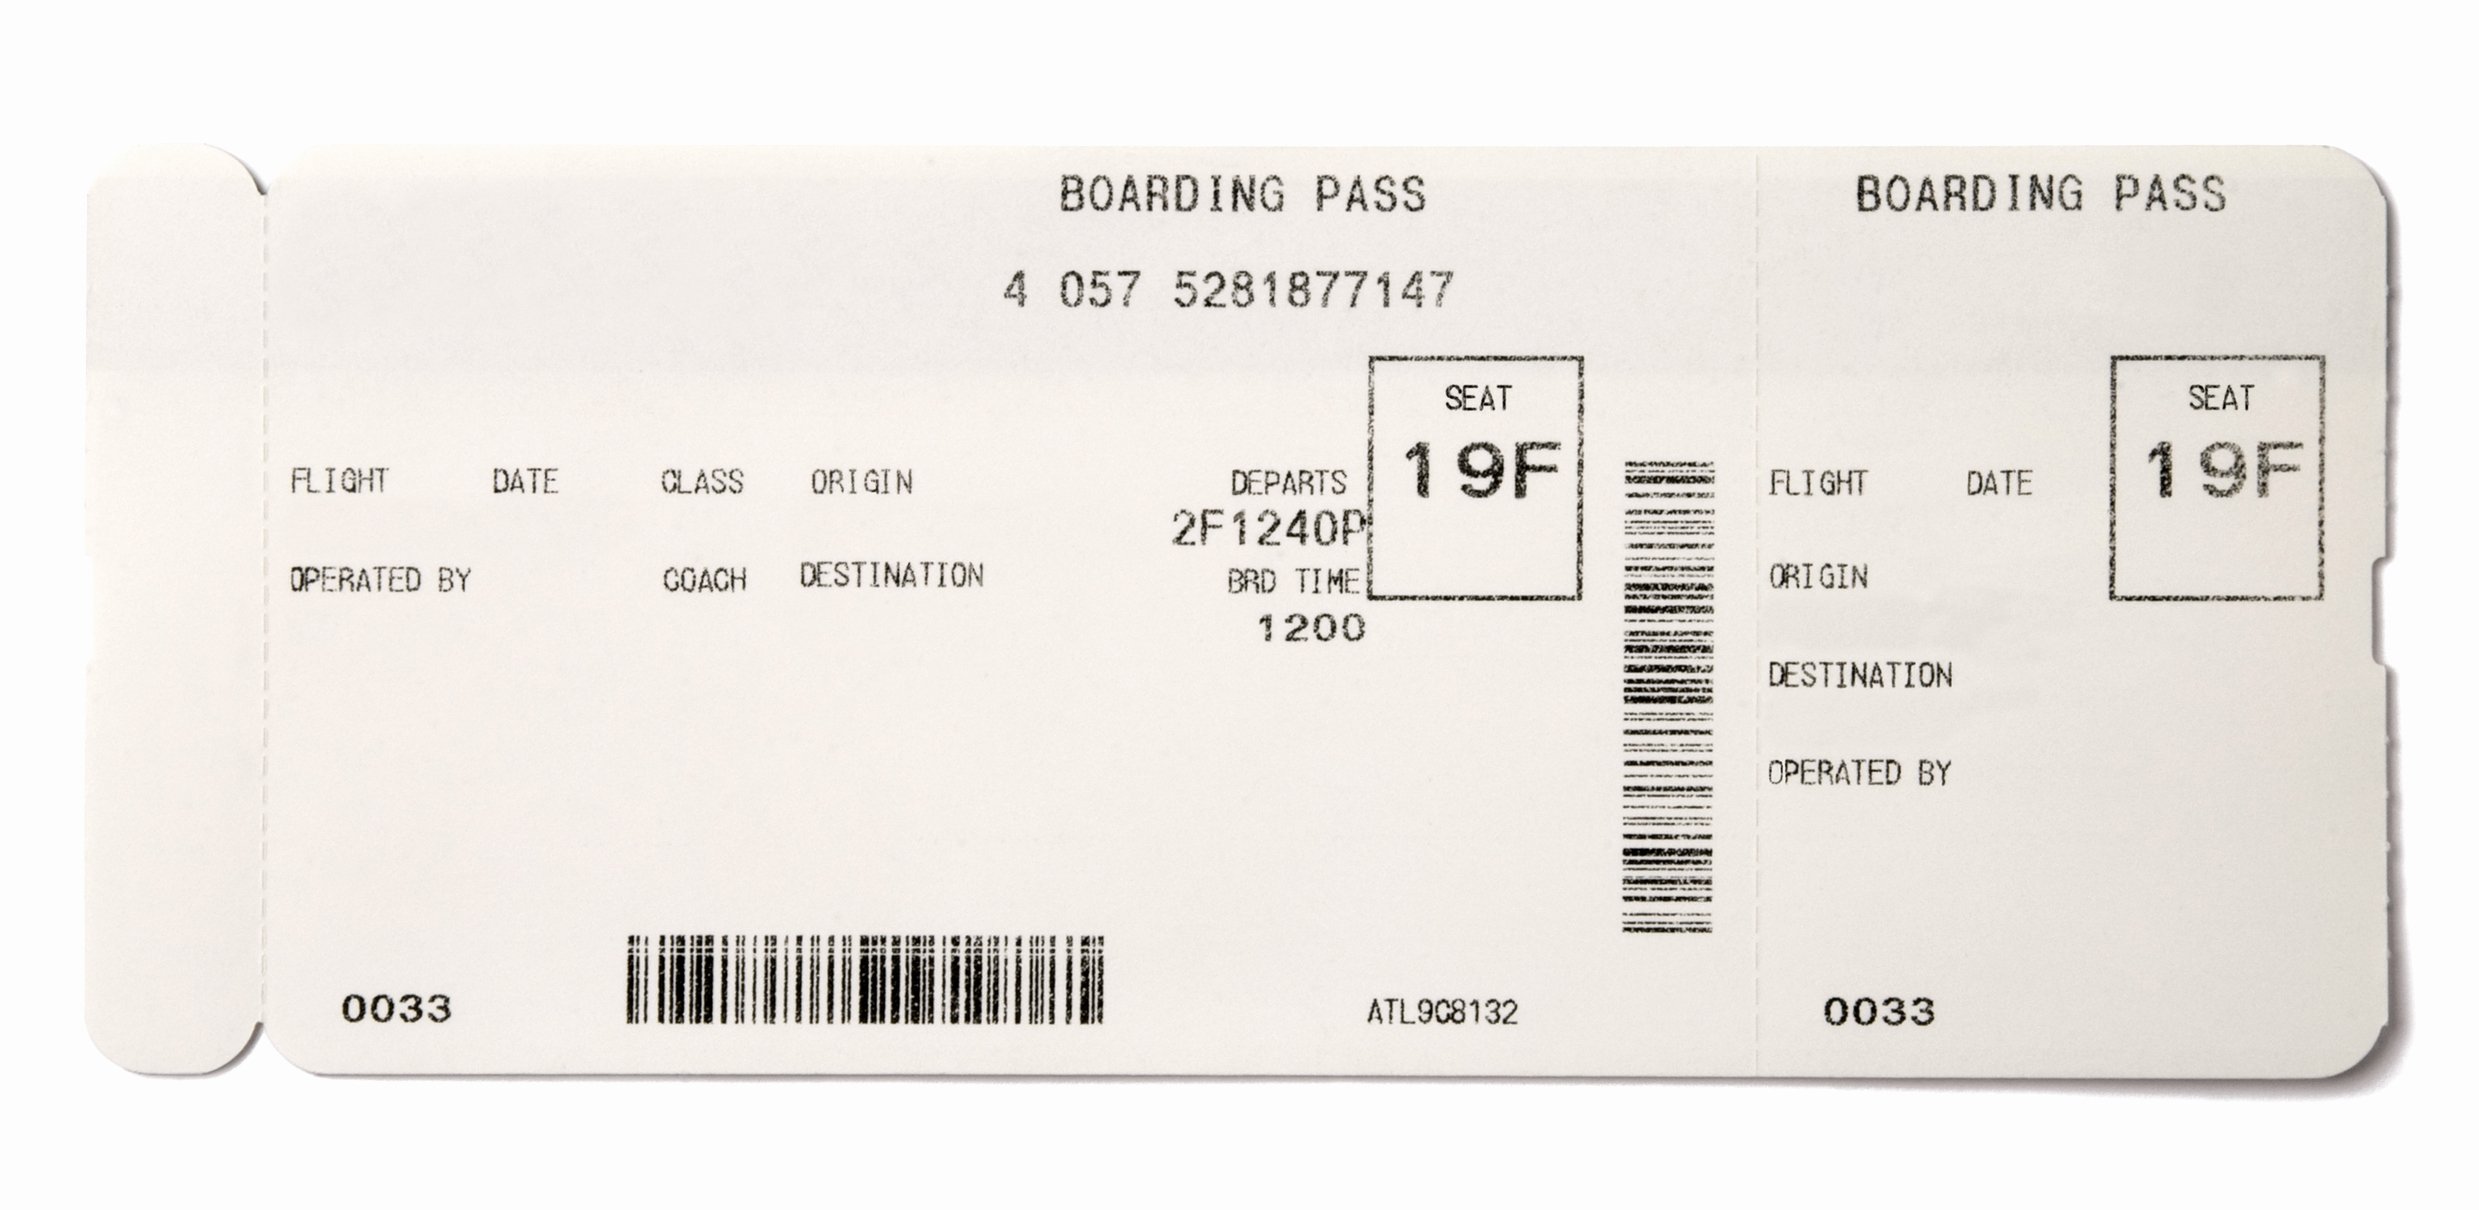 Fake Boarding Pass Template Inspirational Making Fake Boarding Passes as Gifts Le Chic Geek